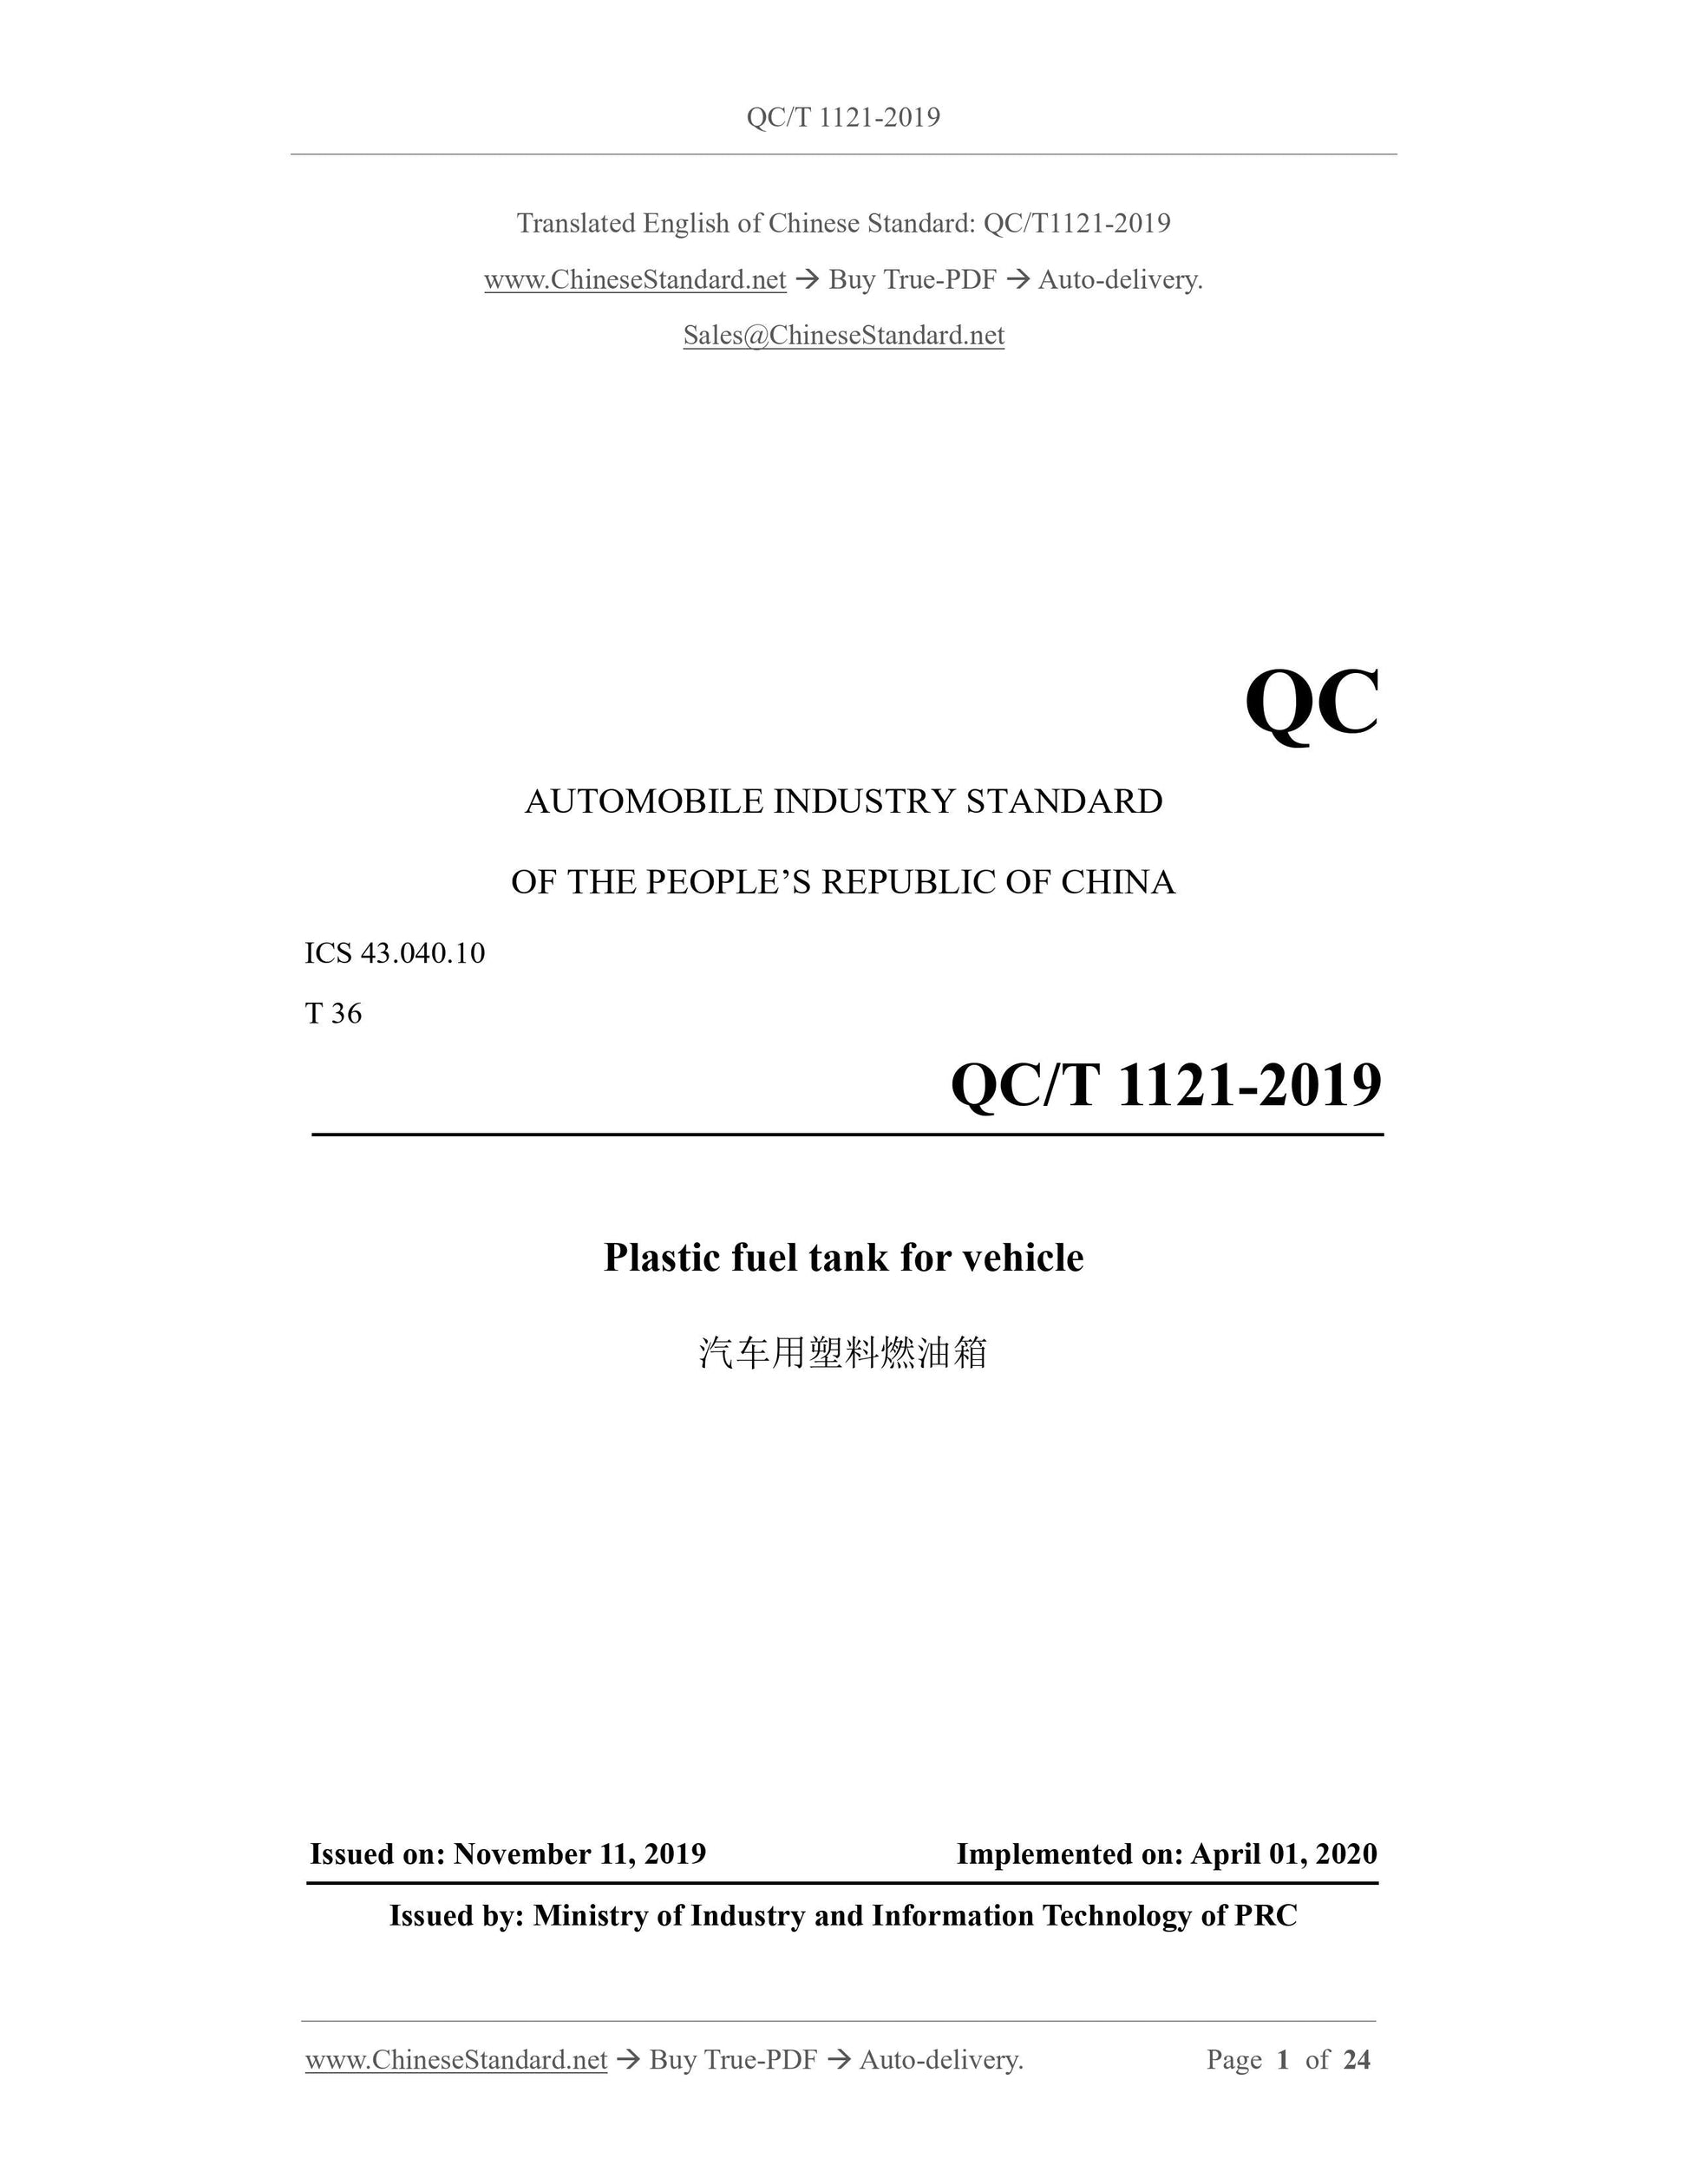 QC/T 1121-2019 Page 1